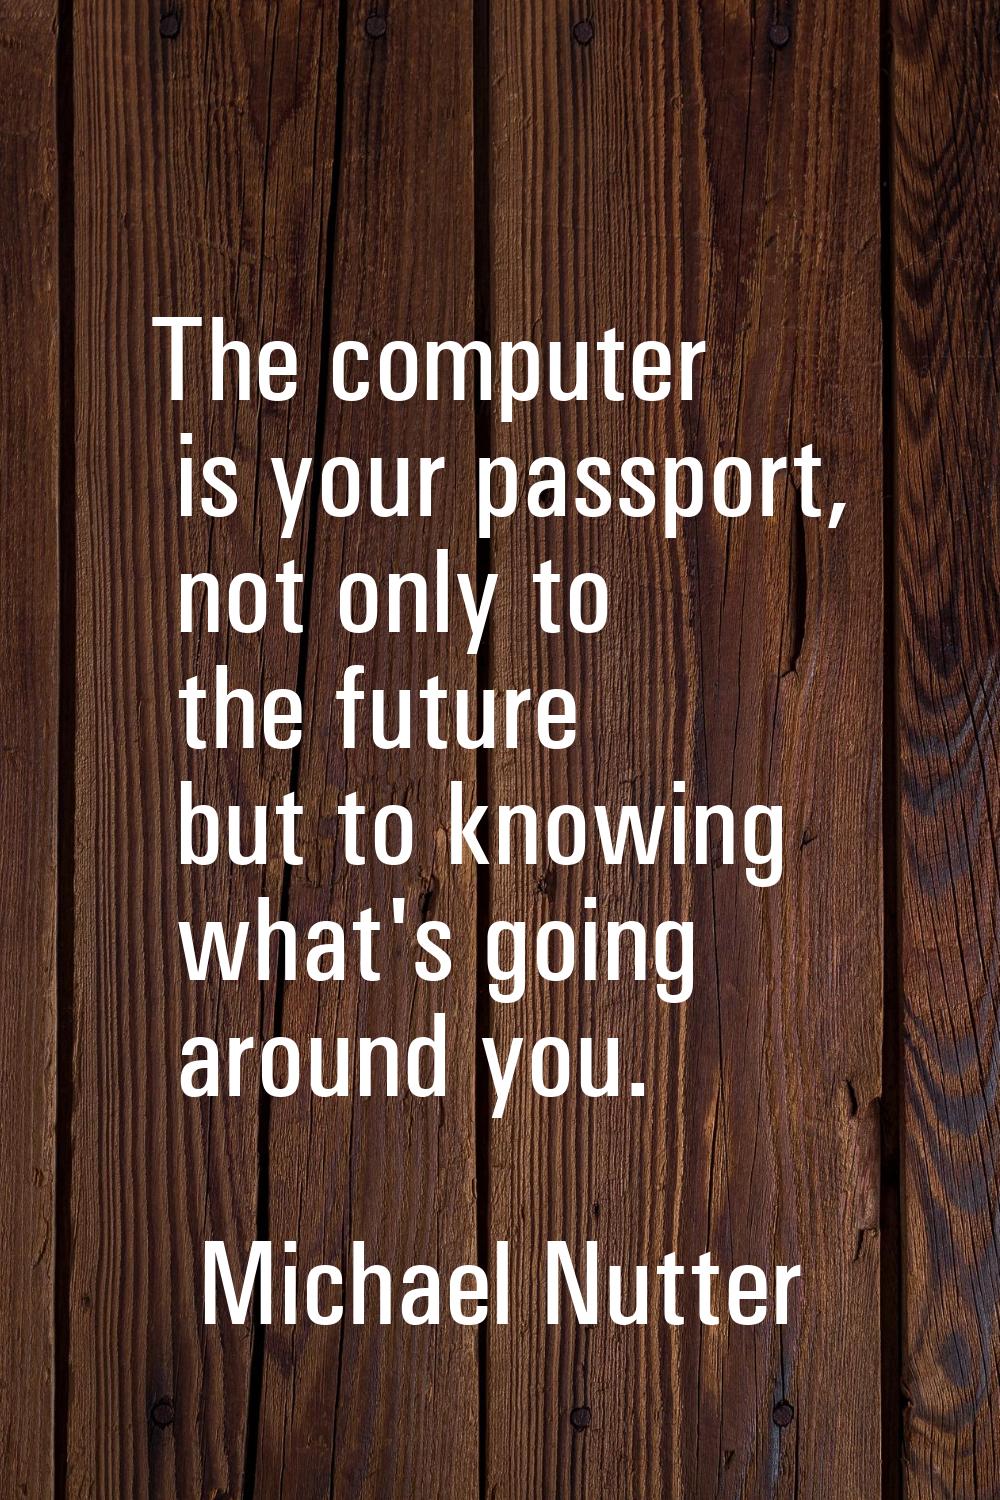 The computer is your passport, not only to the future but to knowing what's going around you.